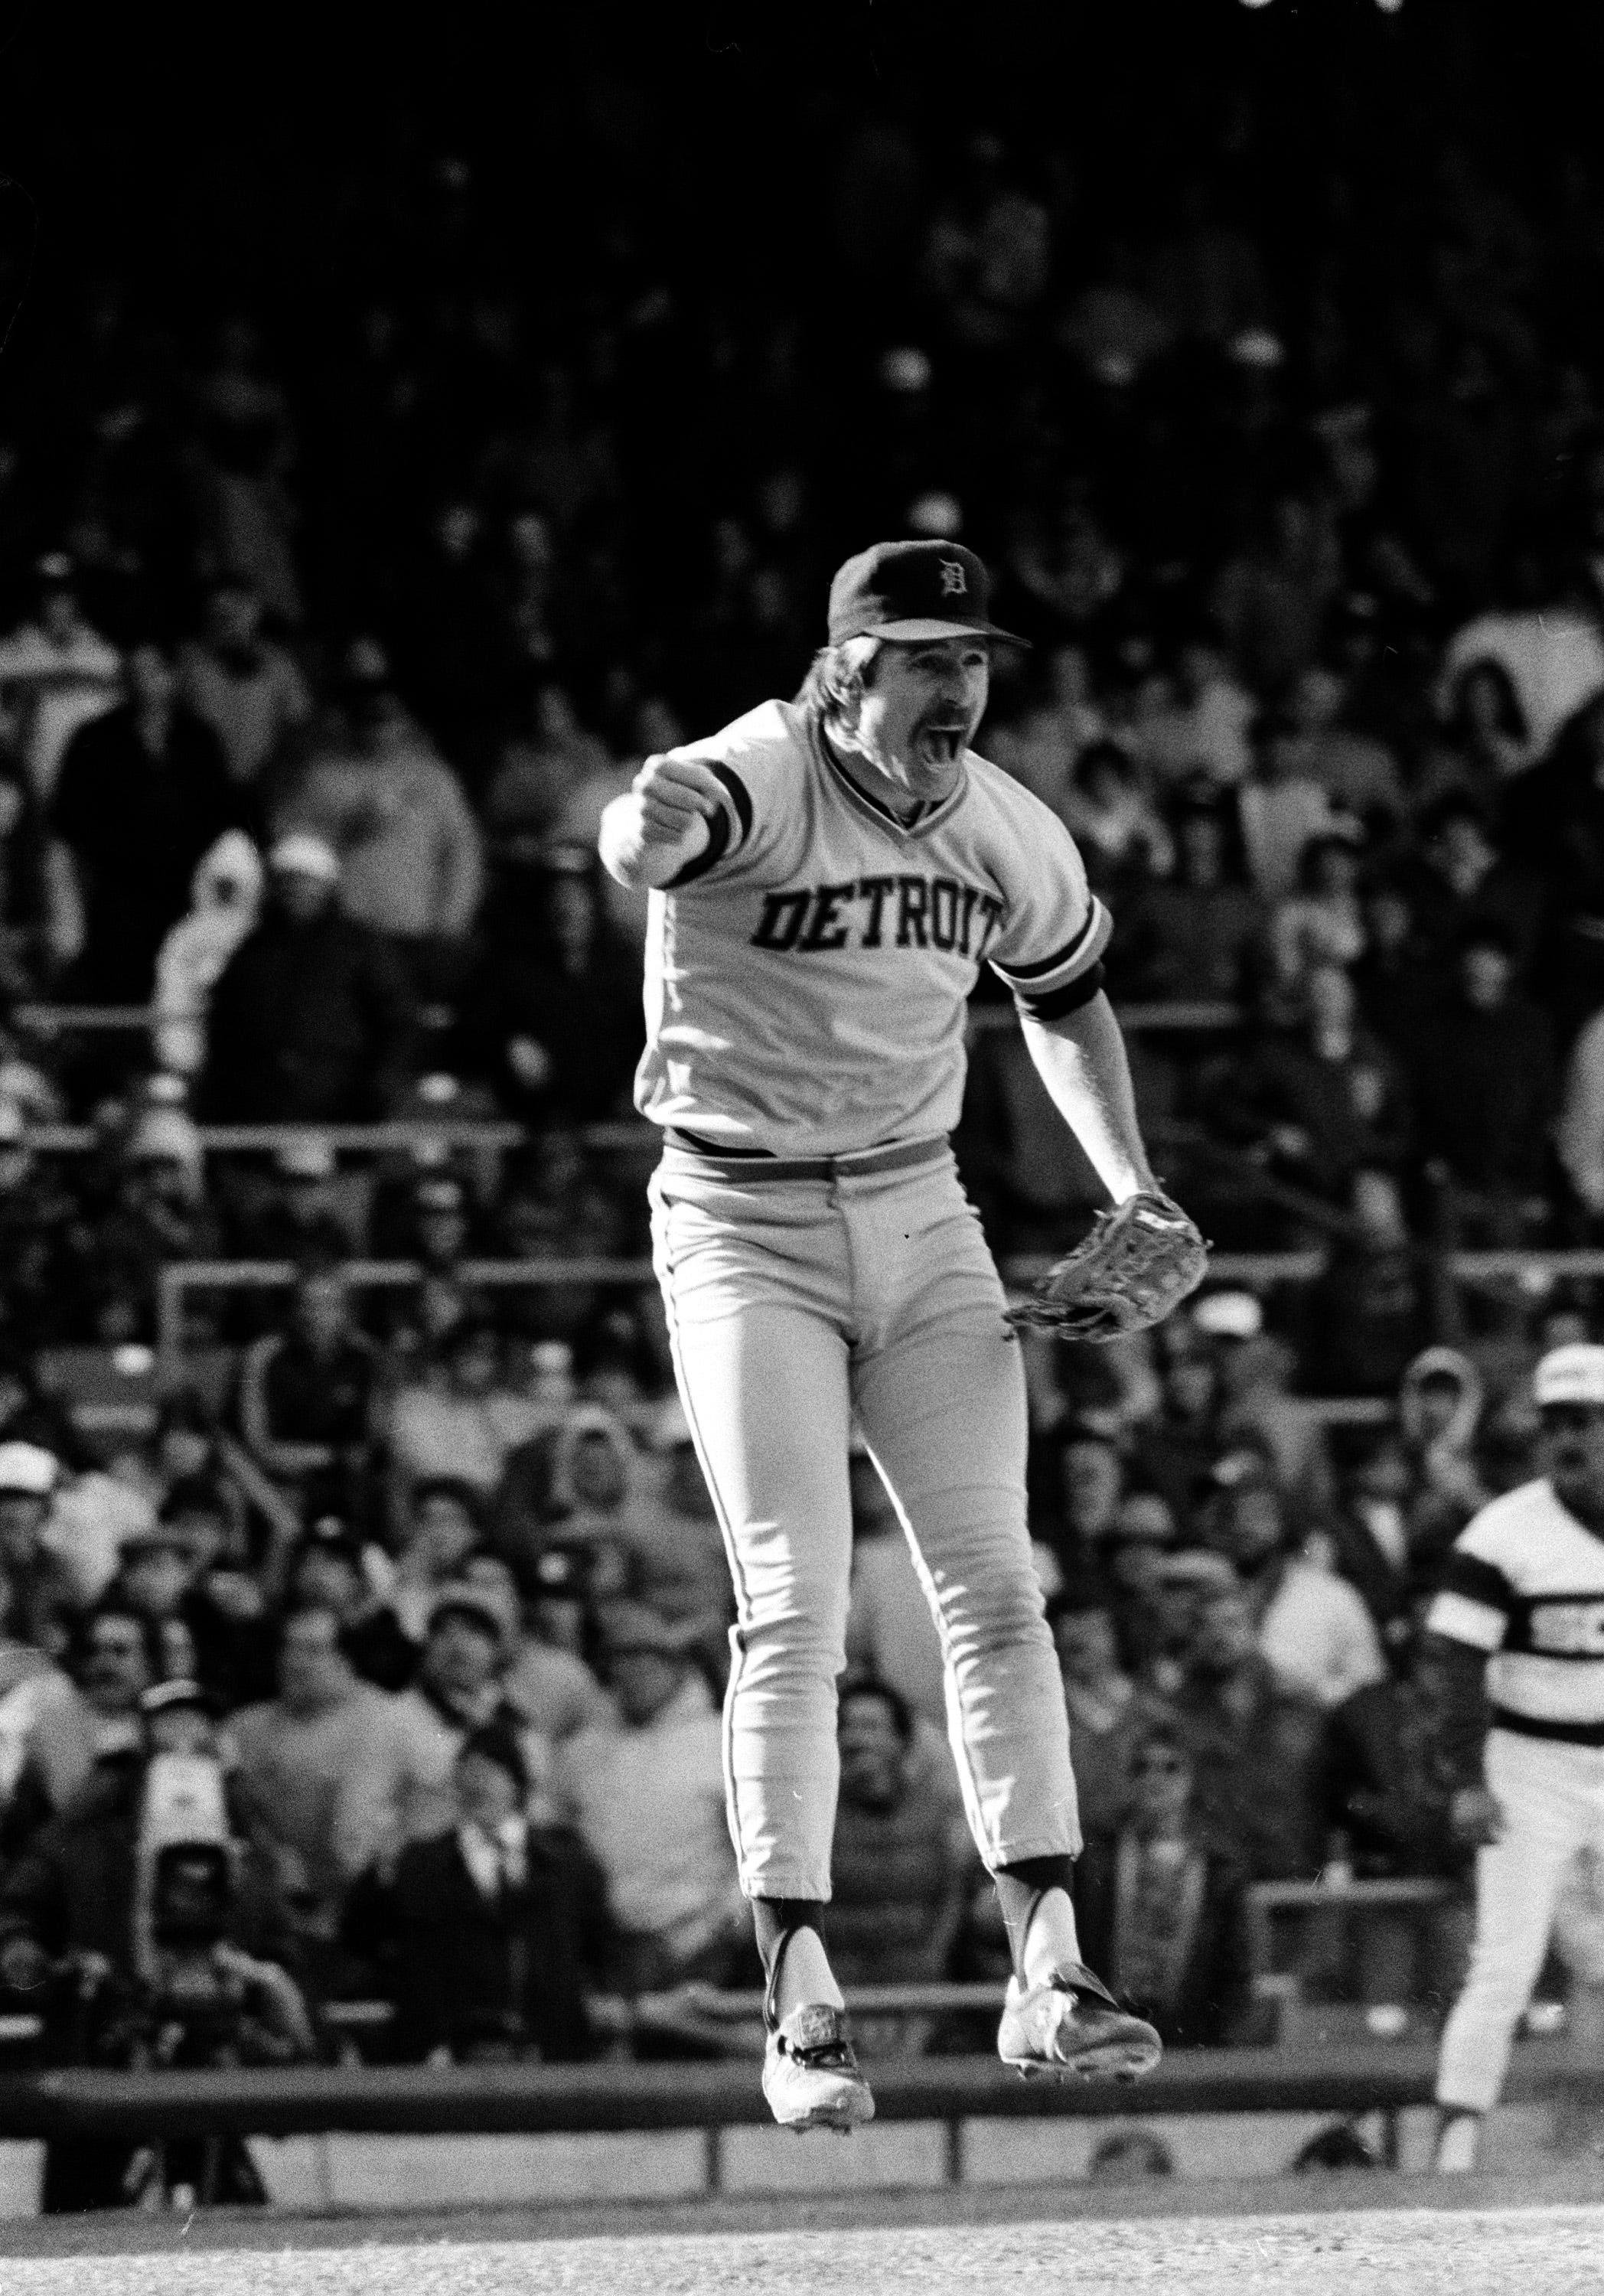 Jack Morris, April 7, 1984: Morris claimed a special moment in what turned out to be a special season for the Tigers, who won the World Series. Morris wasn't perfect -- he walked six -- but struck out eight in the 4-0 victory over the White Sox.